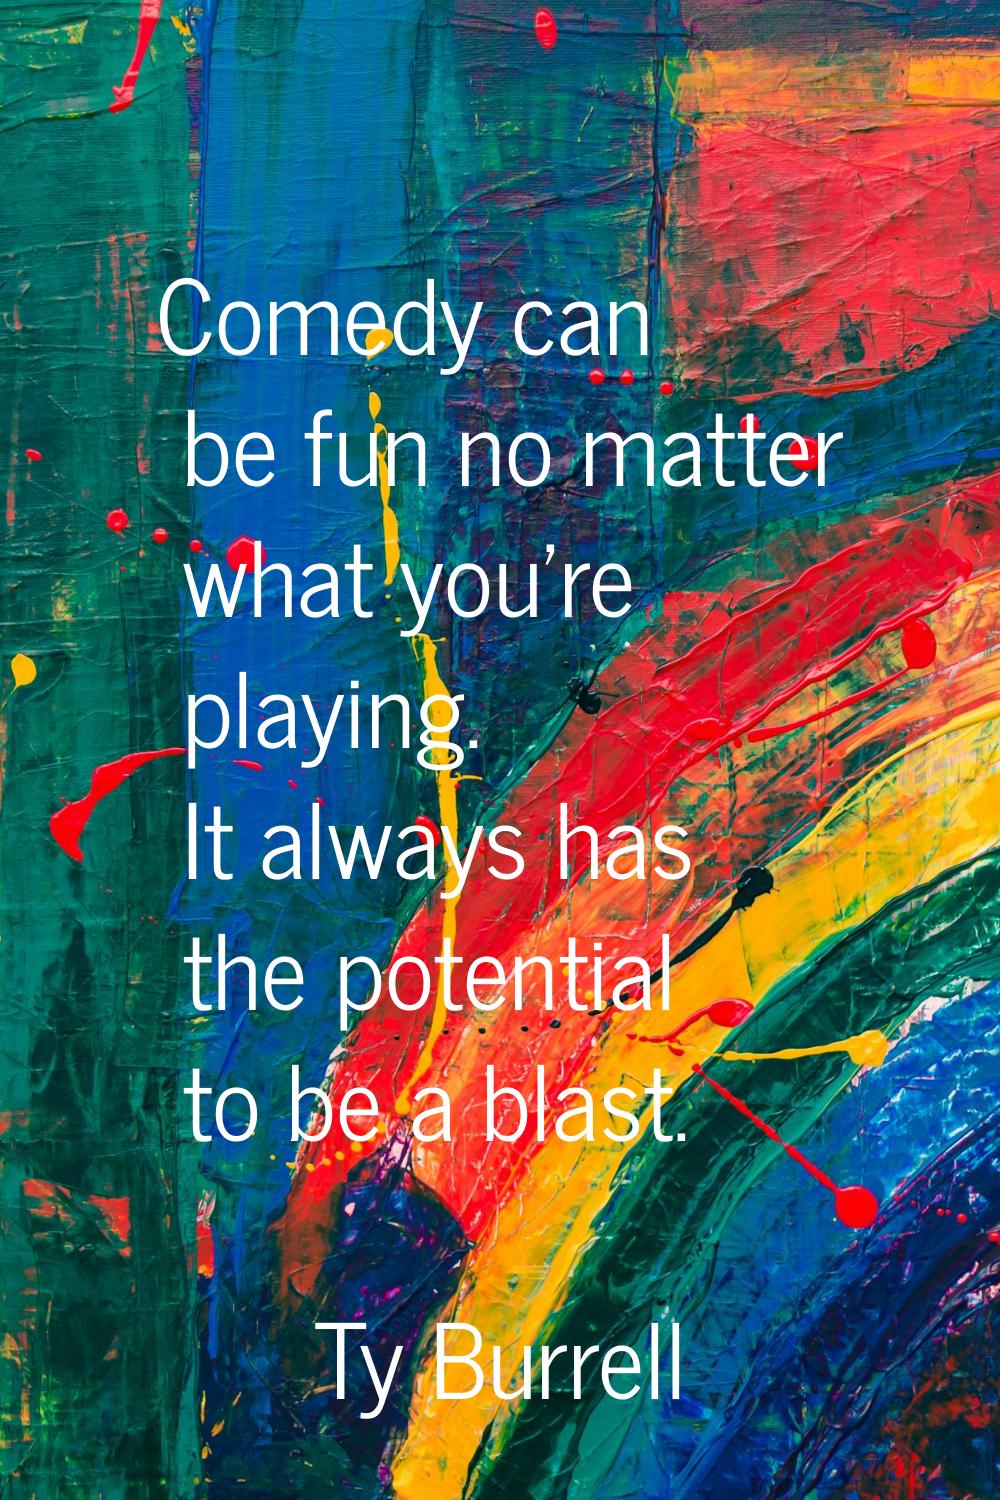 Comedy can be fun no matter what you're playing. It always has the potential to be a blast.